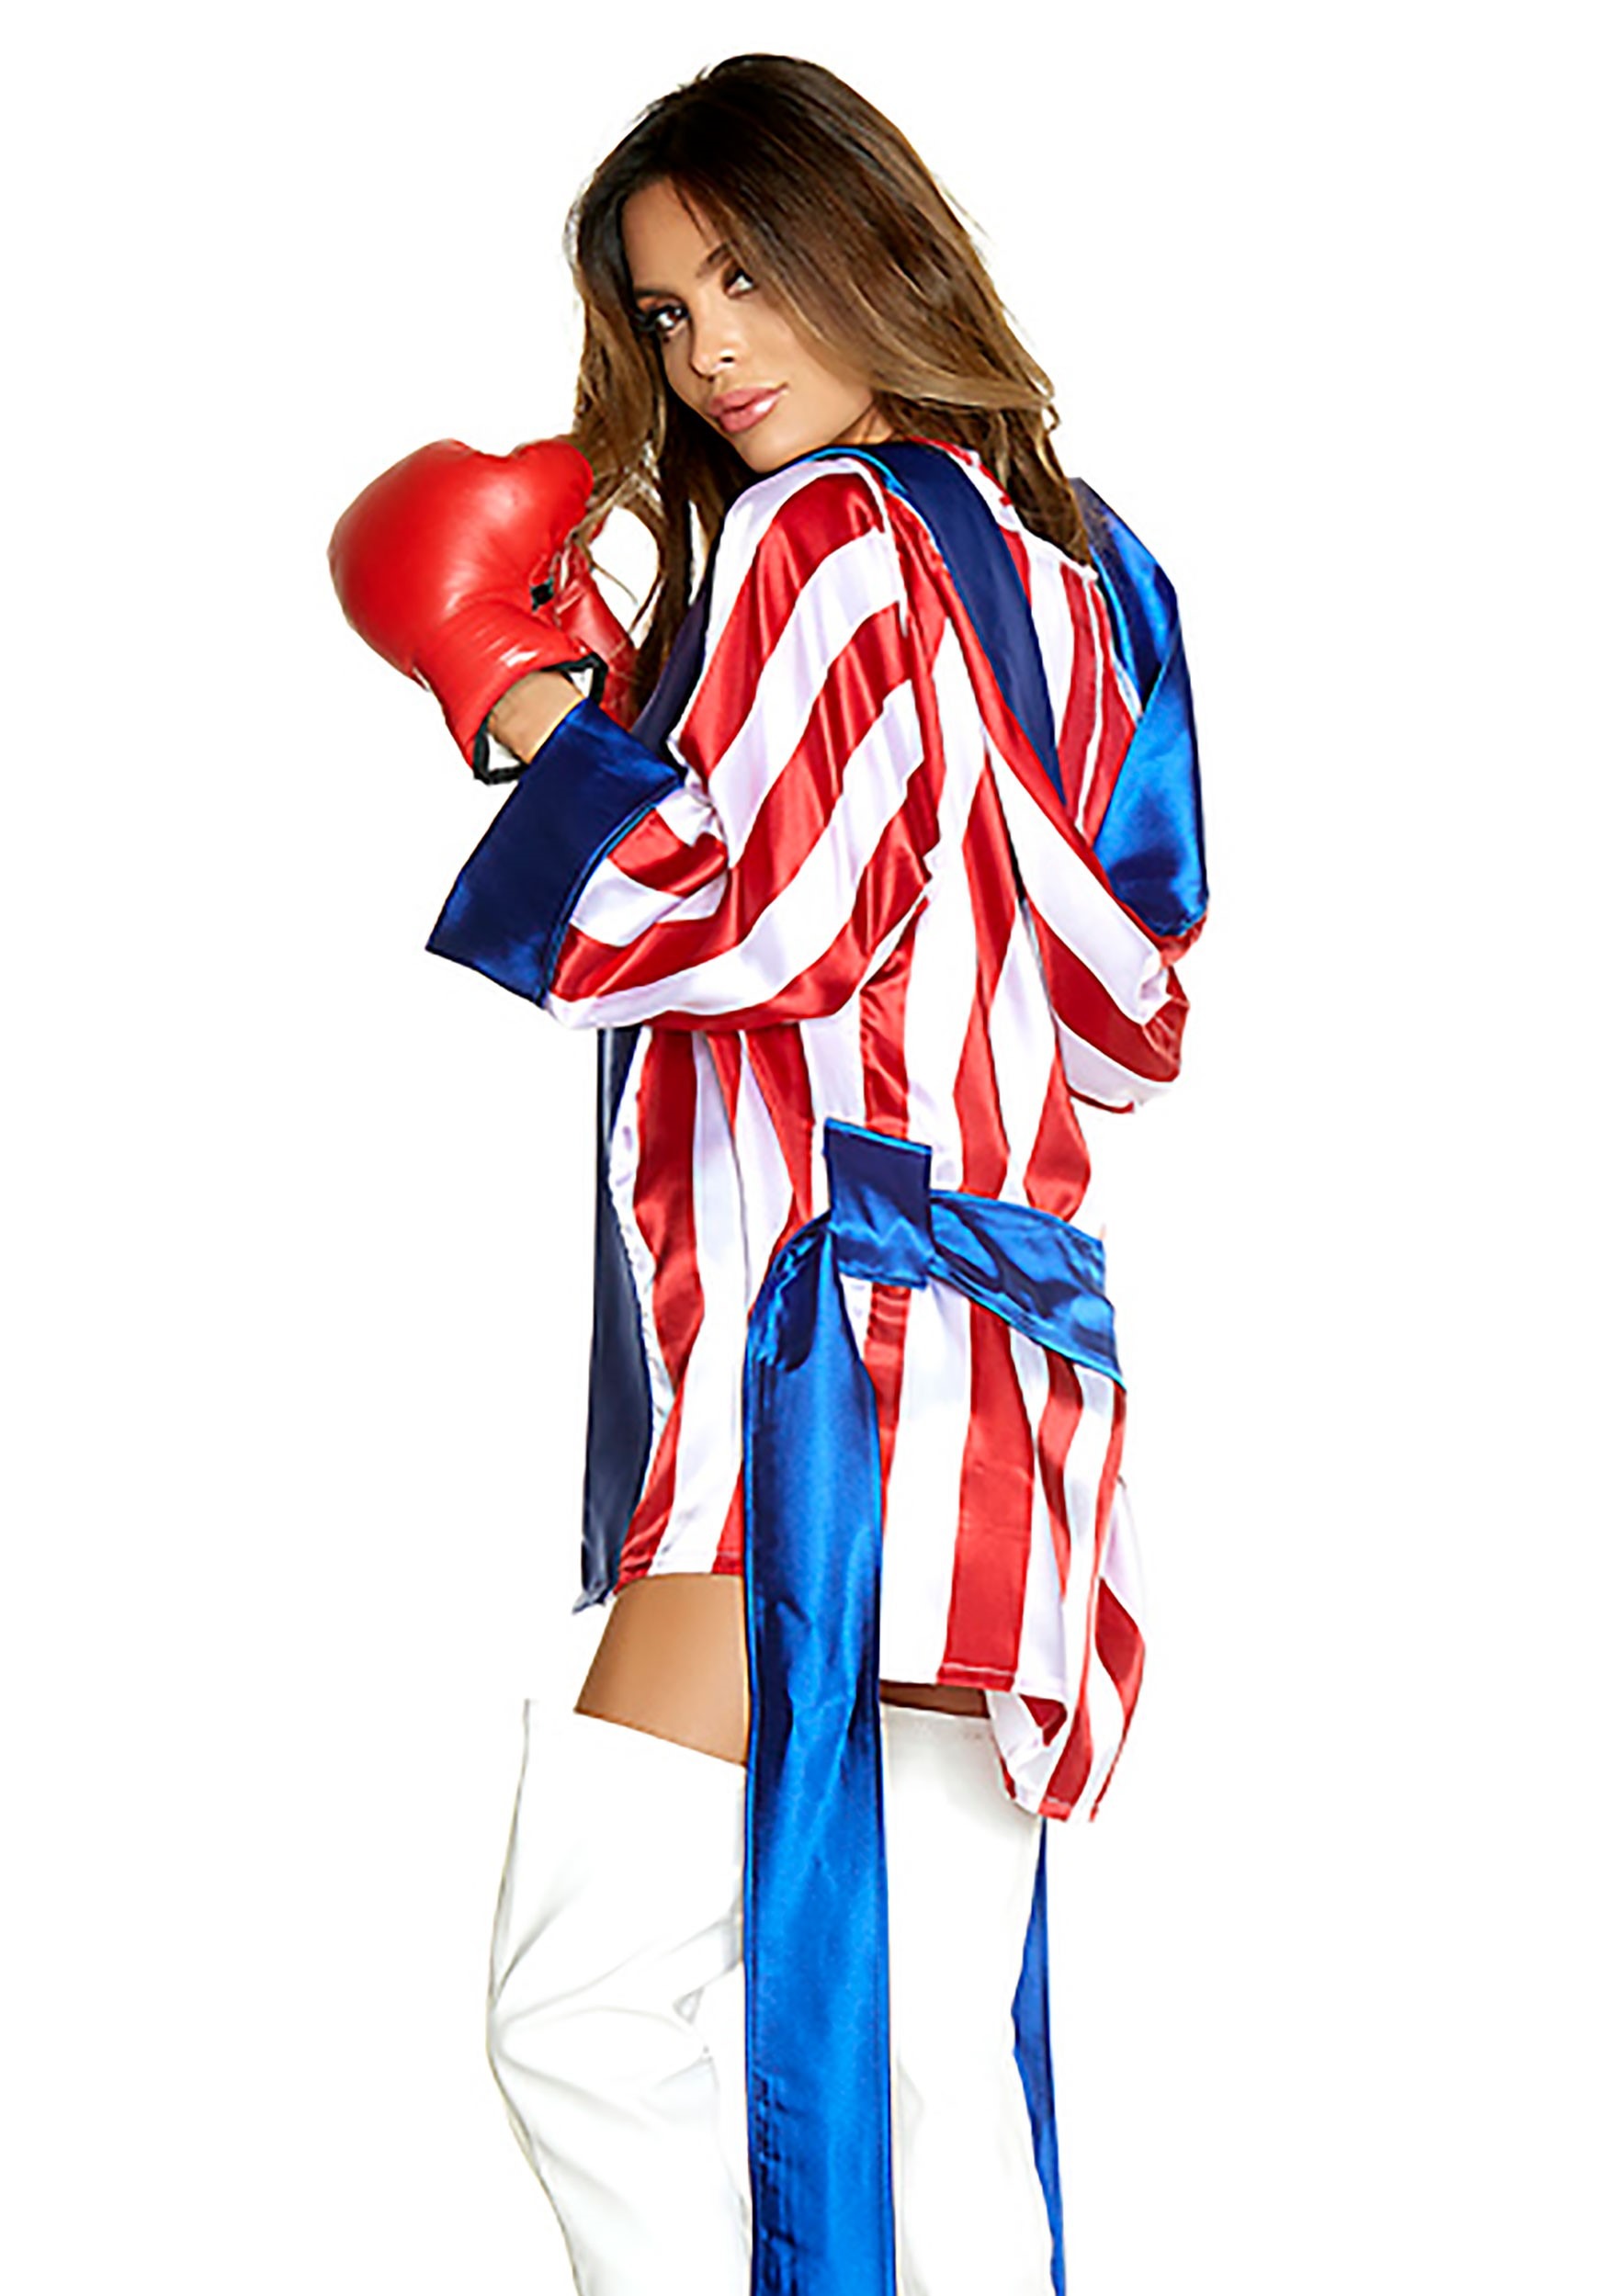 Sexy Get 'Em Champ Boxer Fancy Dress Costume For Women